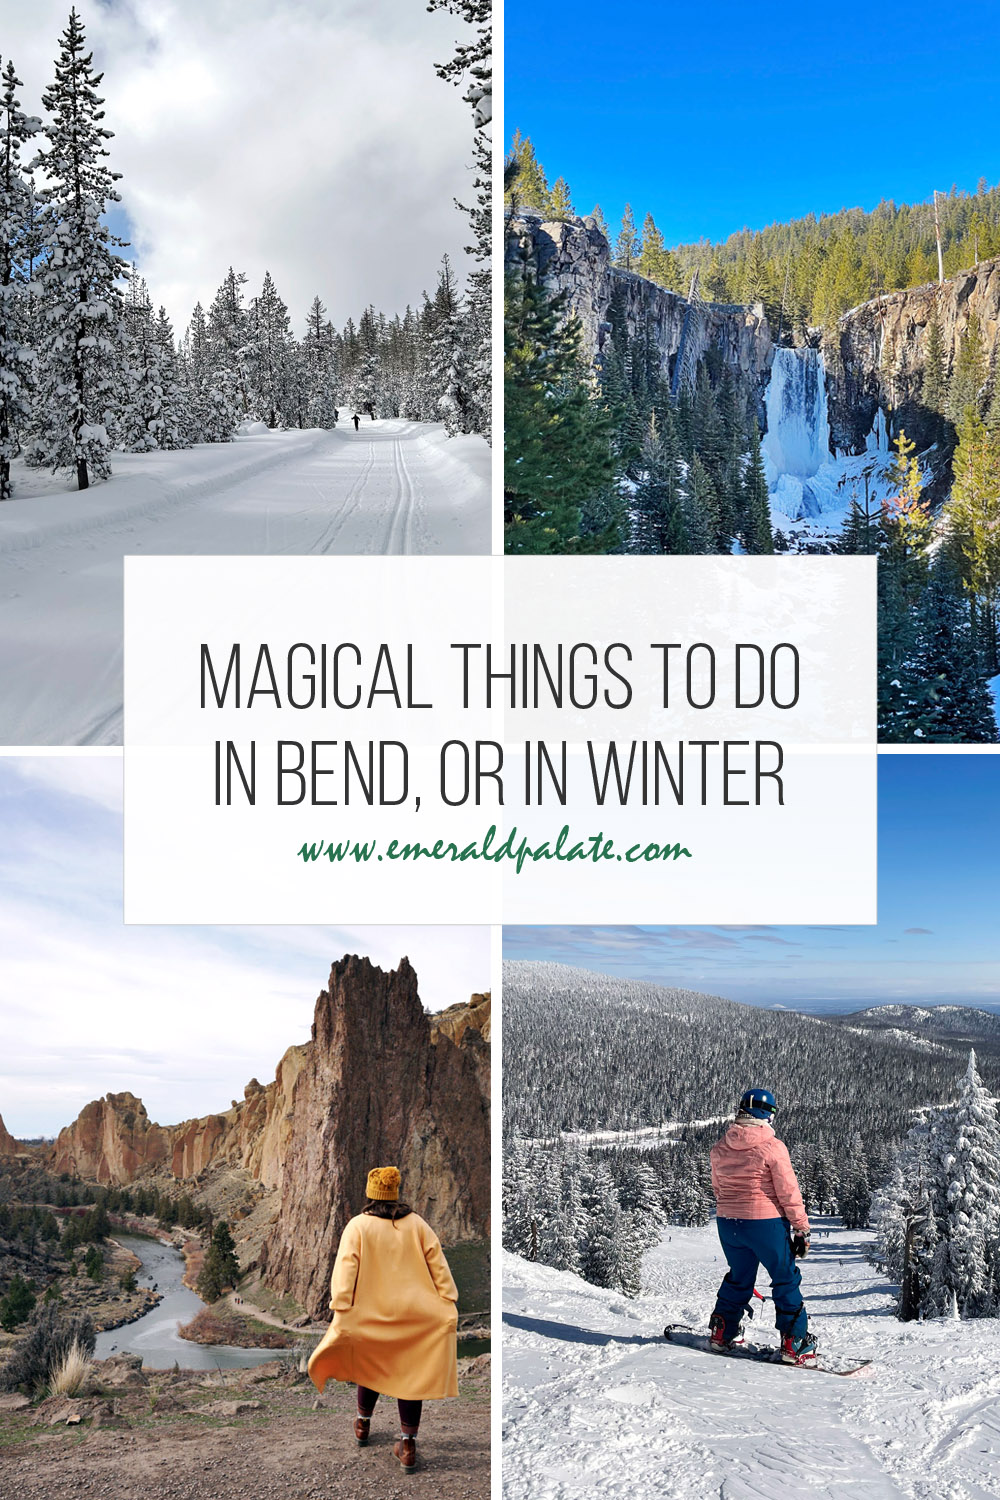 All the magical things in Bend Oregon in winter, including cross-country skiing in Bend, downhill skiing in Bend, snowshoeing in Bend, and other winter activities in Bend, OR